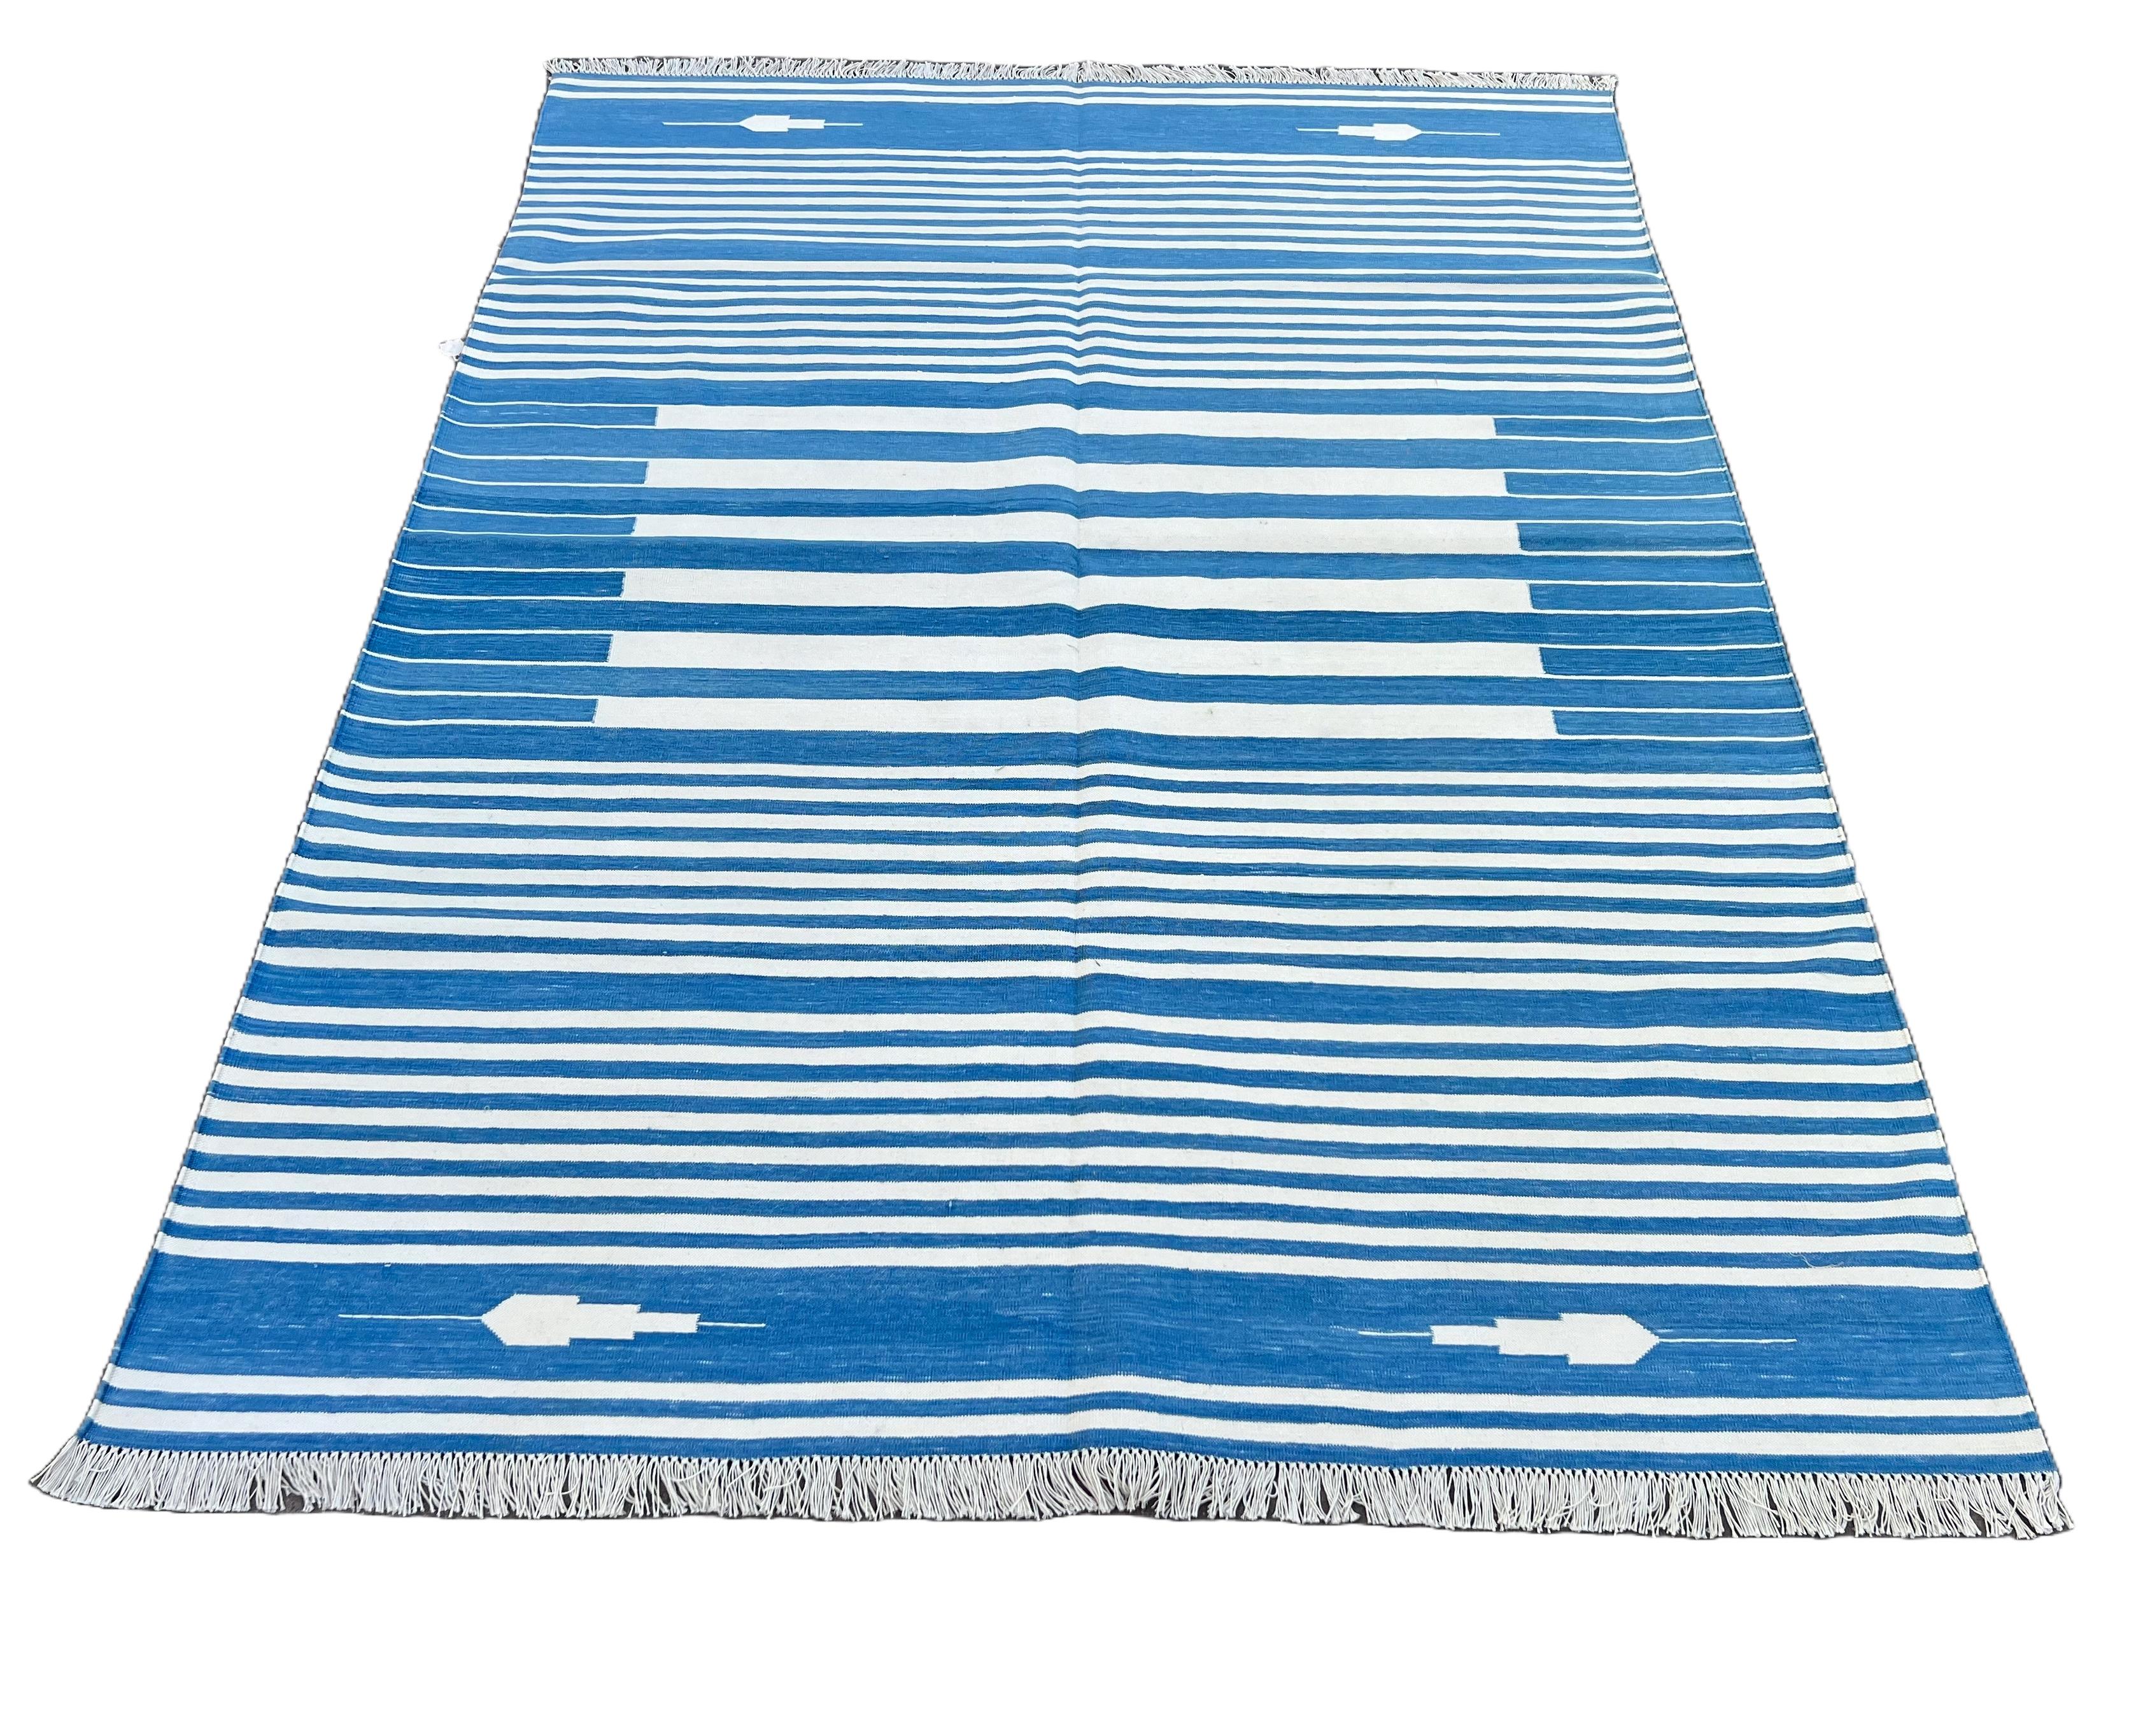 Contemporary Handmade Cotton Area Flat Weave Rug, 5x7 Blue And White Striped Indian Dhurrie For Sale